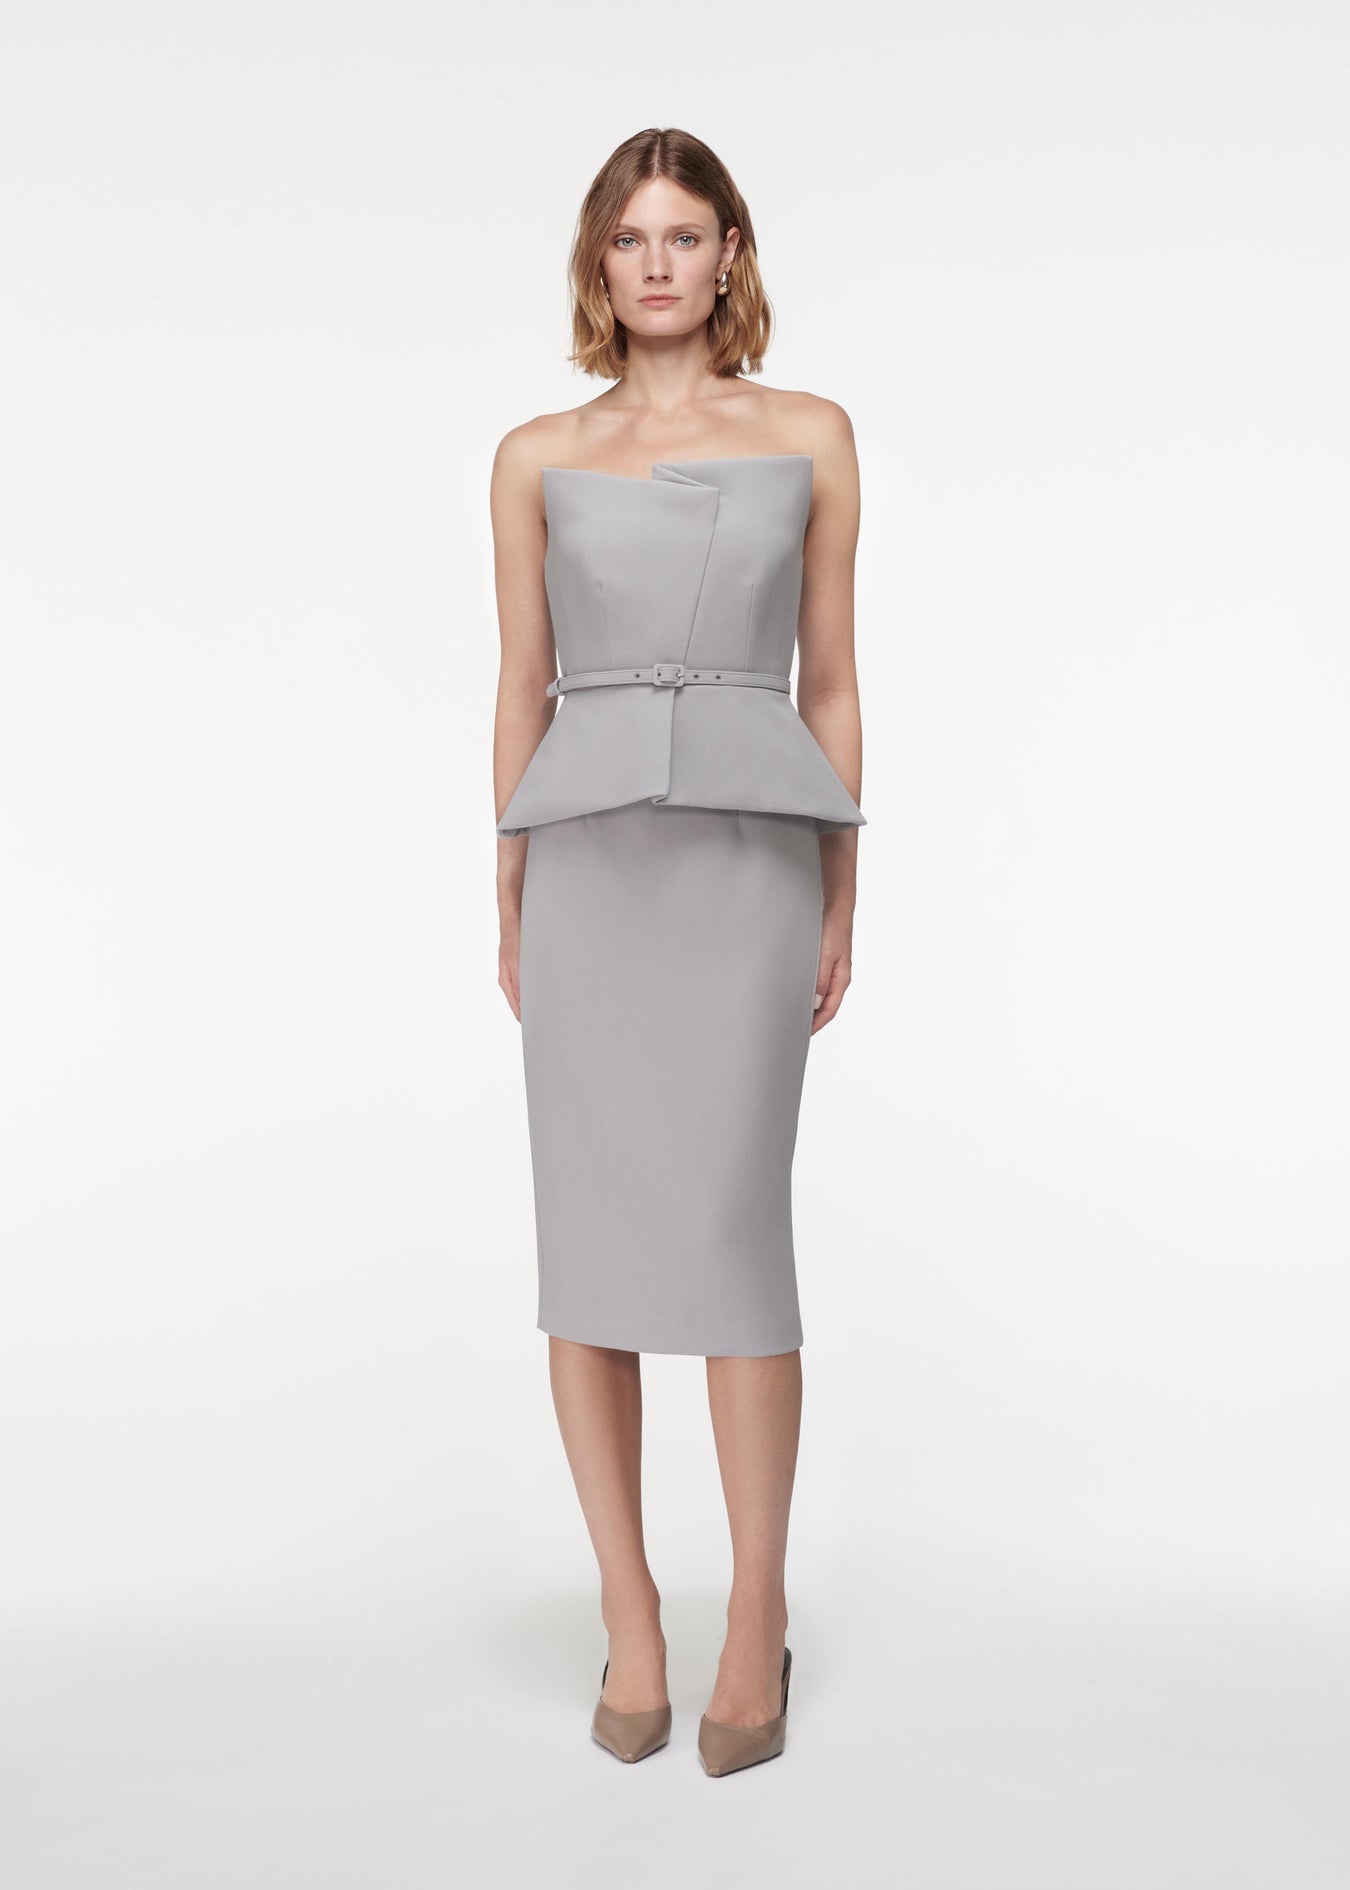 A photograph of a woman wearing a Strapless Crepe Peplum Top in Grey